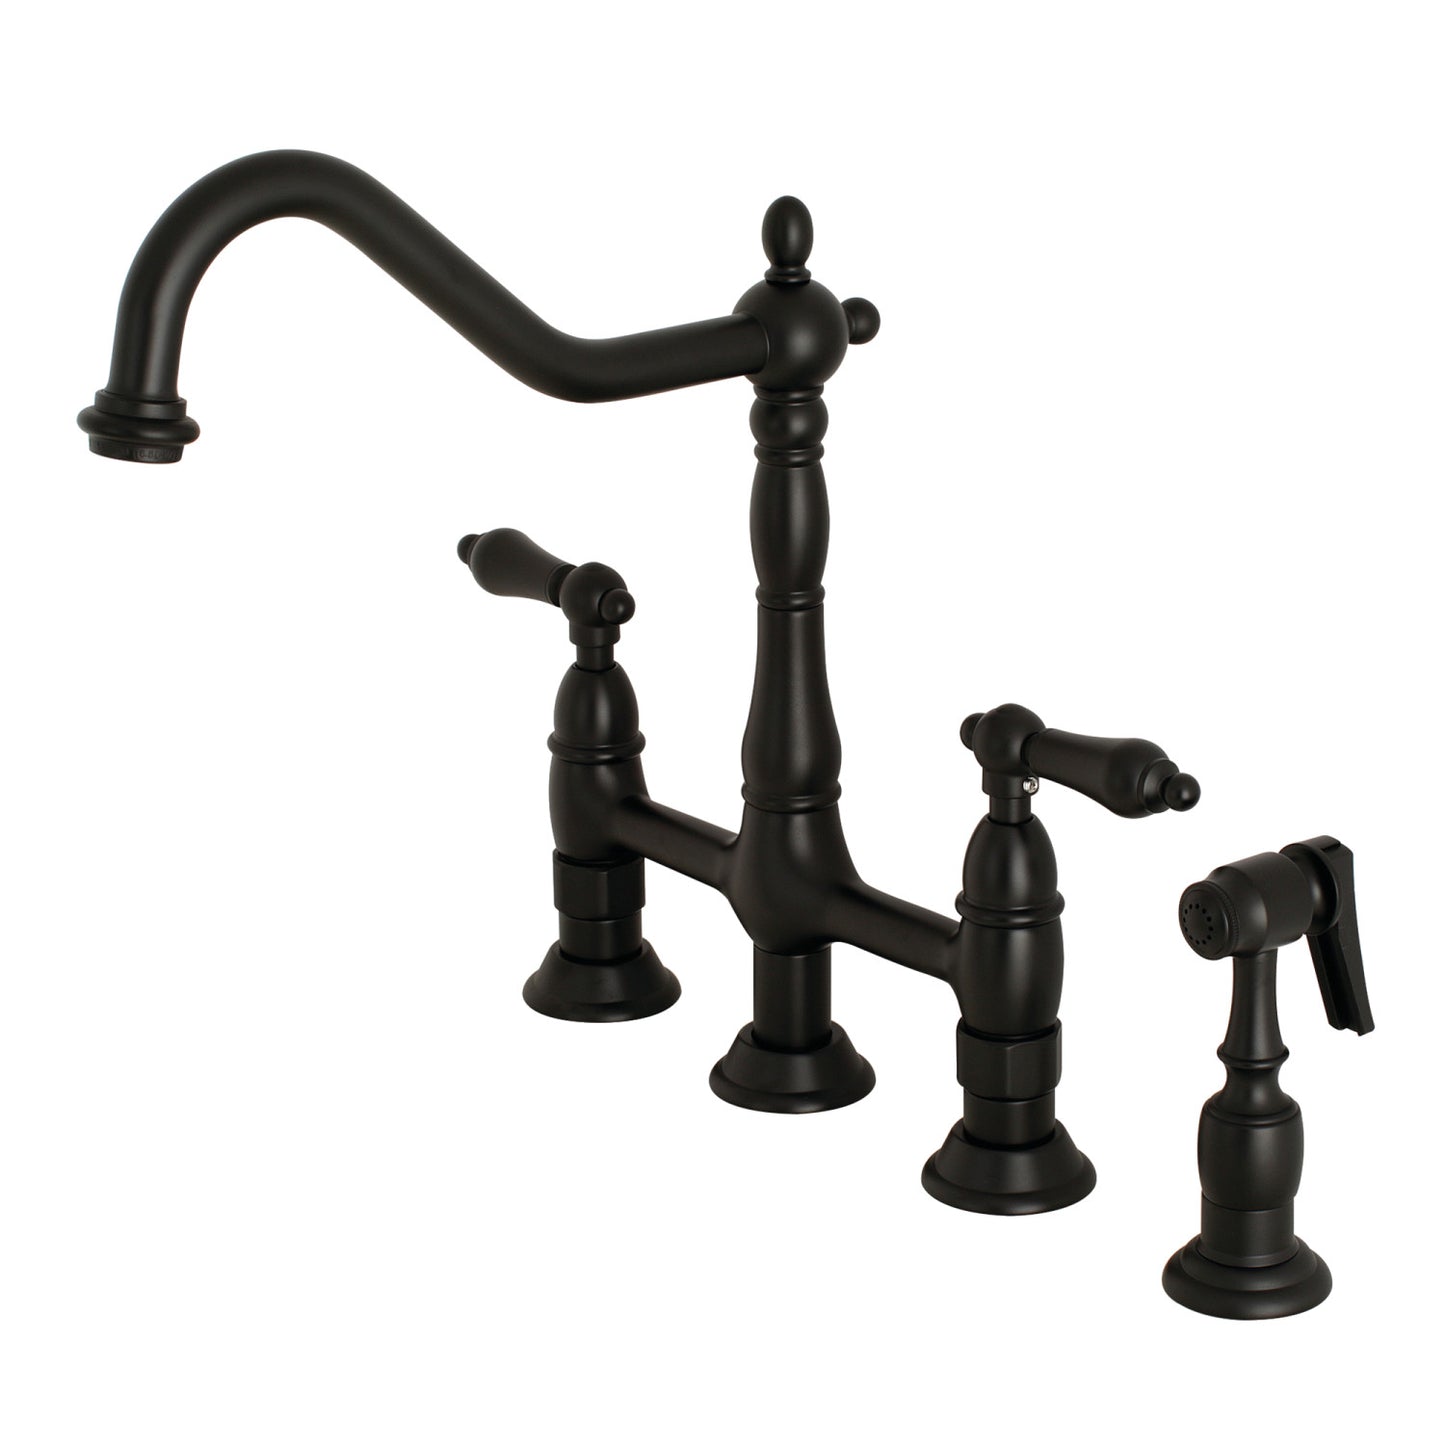 Lever Handles Bridge Kitchen Faucet with Side Spray